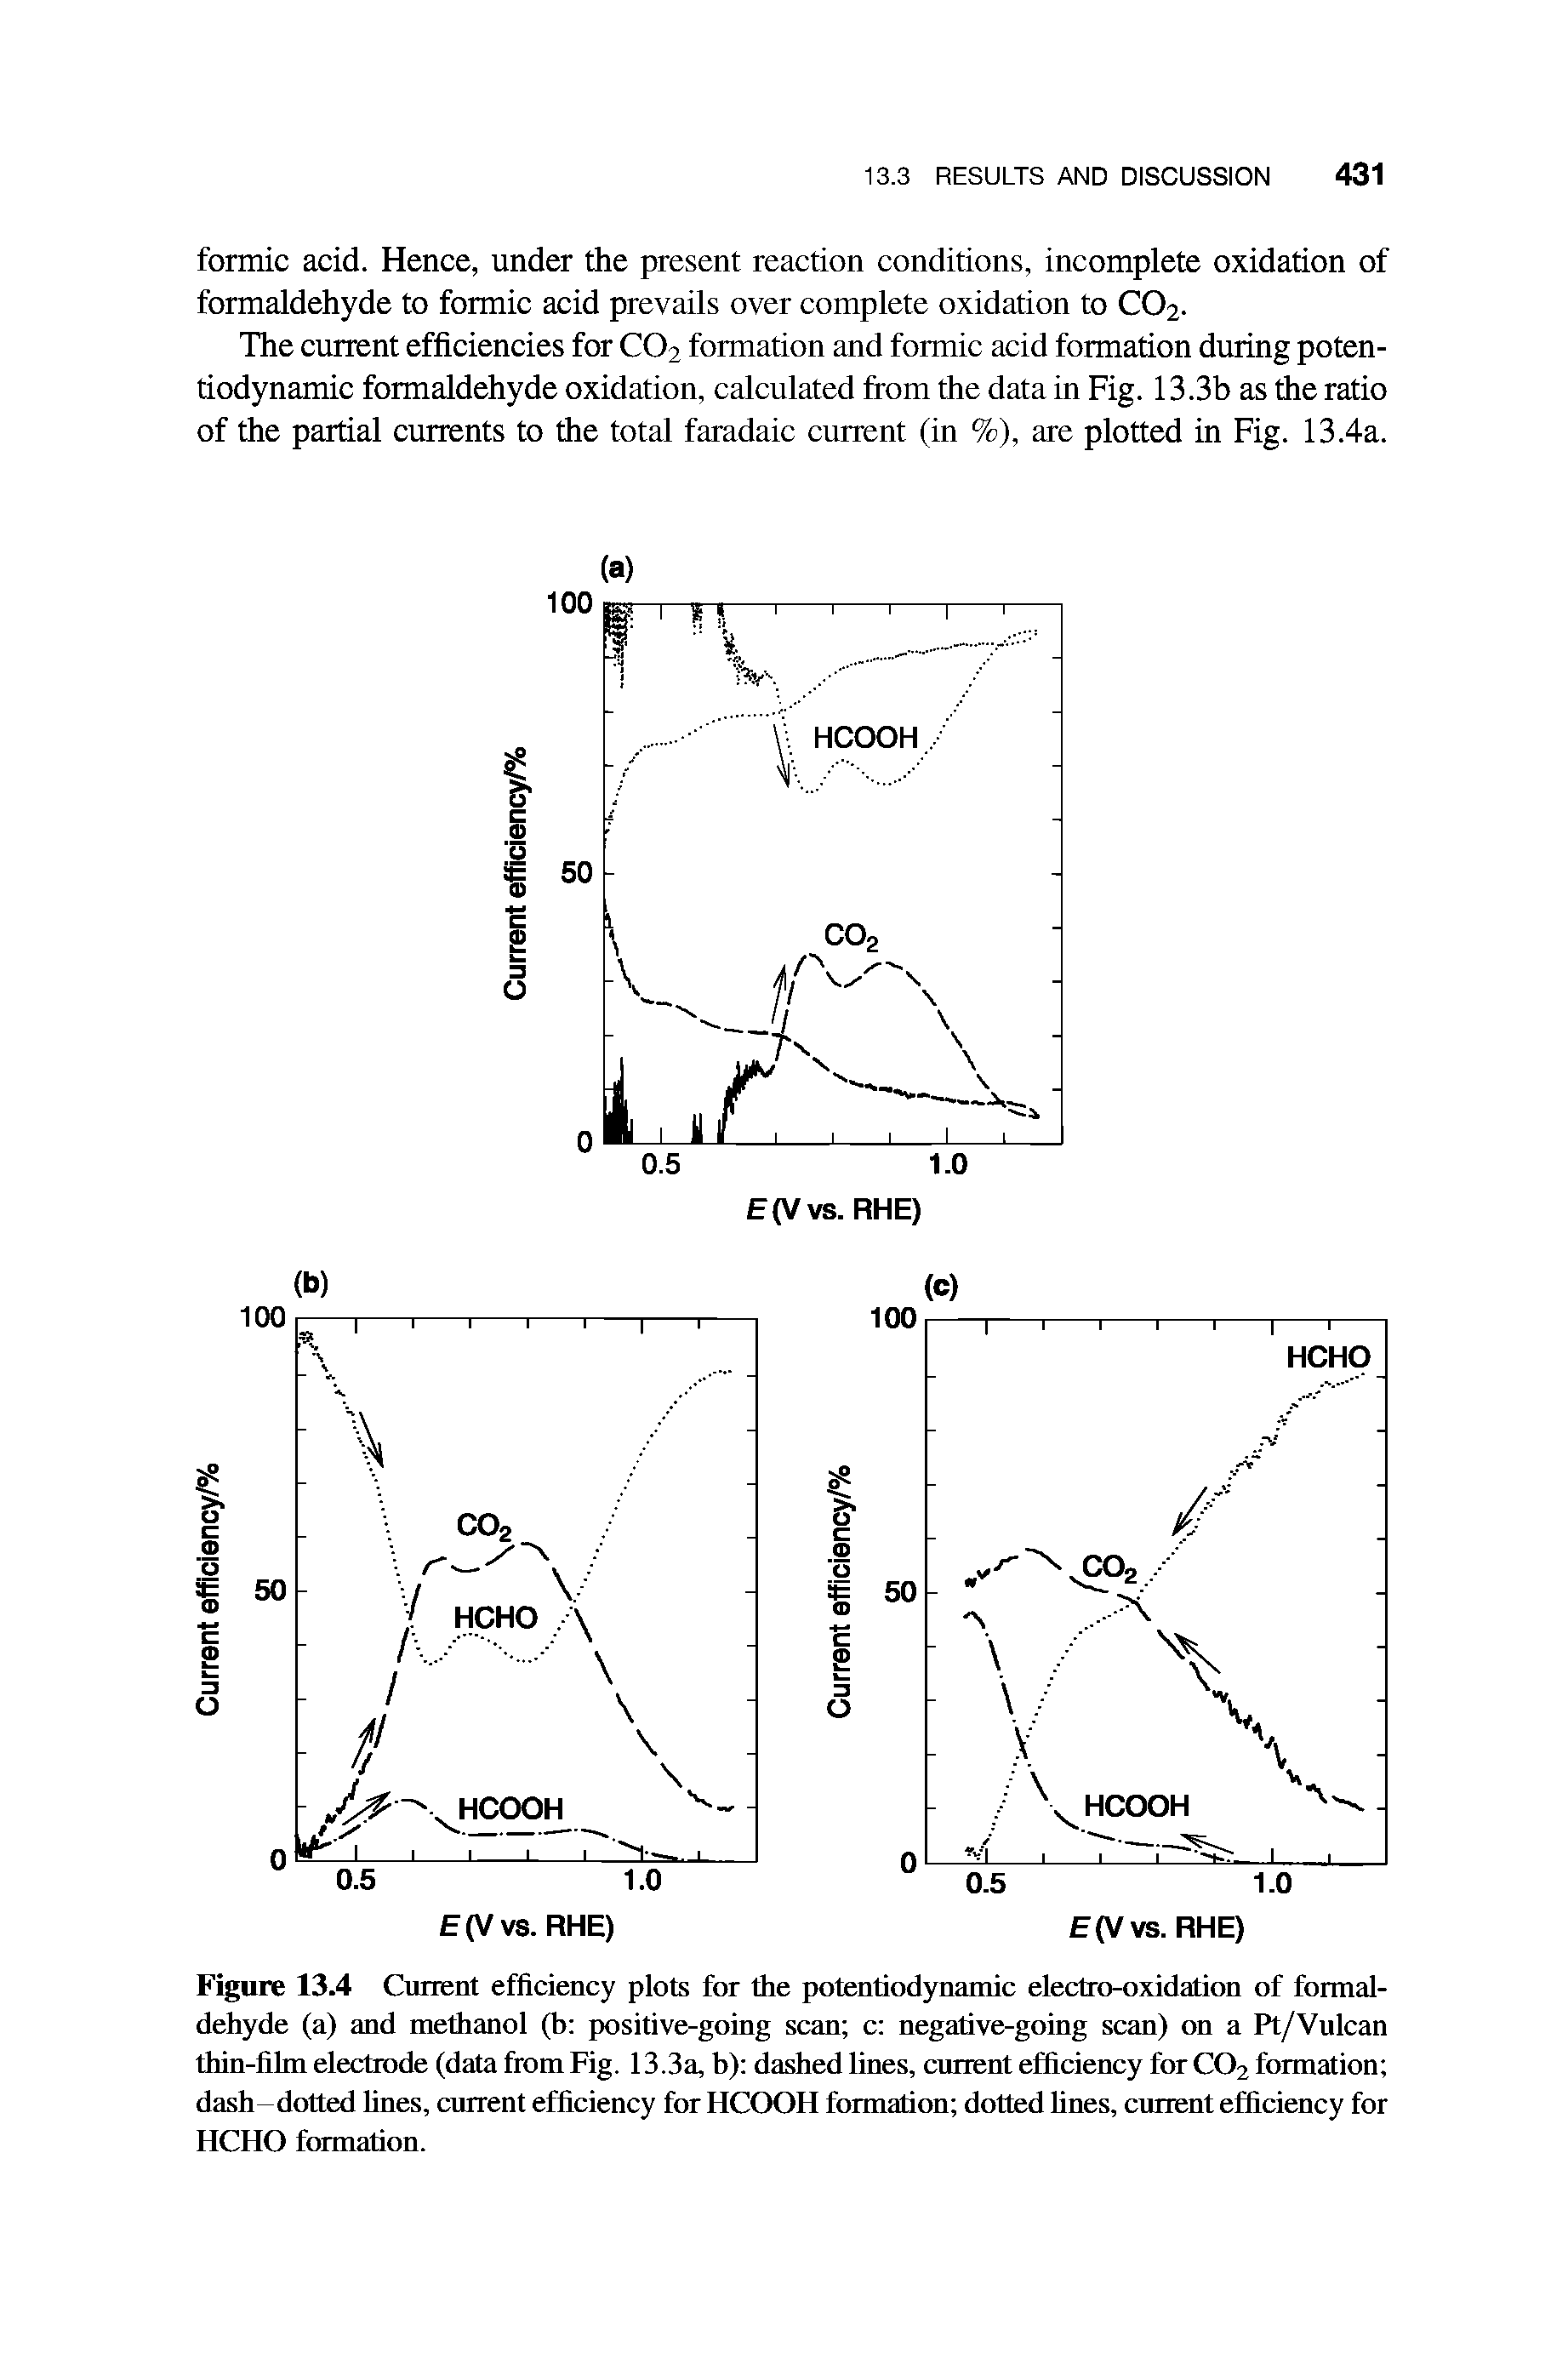 Figure 13.4 Current efficiency plots for the potentiodynamic electro-oxidation of formaldehyde (a) and methanol (h positive-going scan c negative-going scan) on a Pt/Vulcan thin-fihn electrode (data from Fig. 13.3a, h) dashed lines, current efficiency for CO2 formation dash-dotted fines, current efficiency for HCOOH formation dotted fines, current efficiency for HCHO formation.